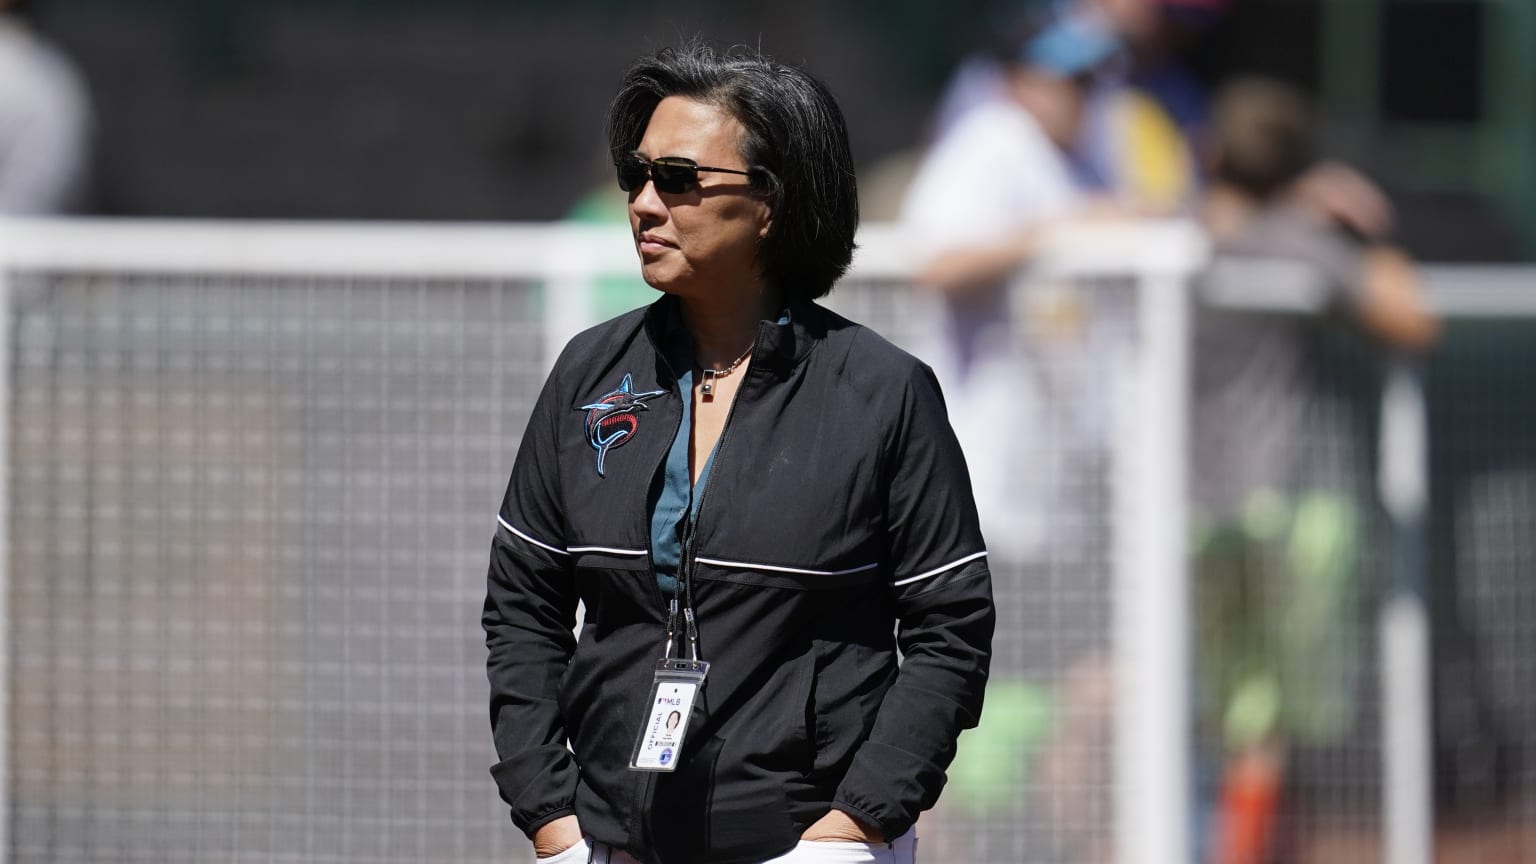 Marlins general manager Kim Ng is pictured on the field before a game